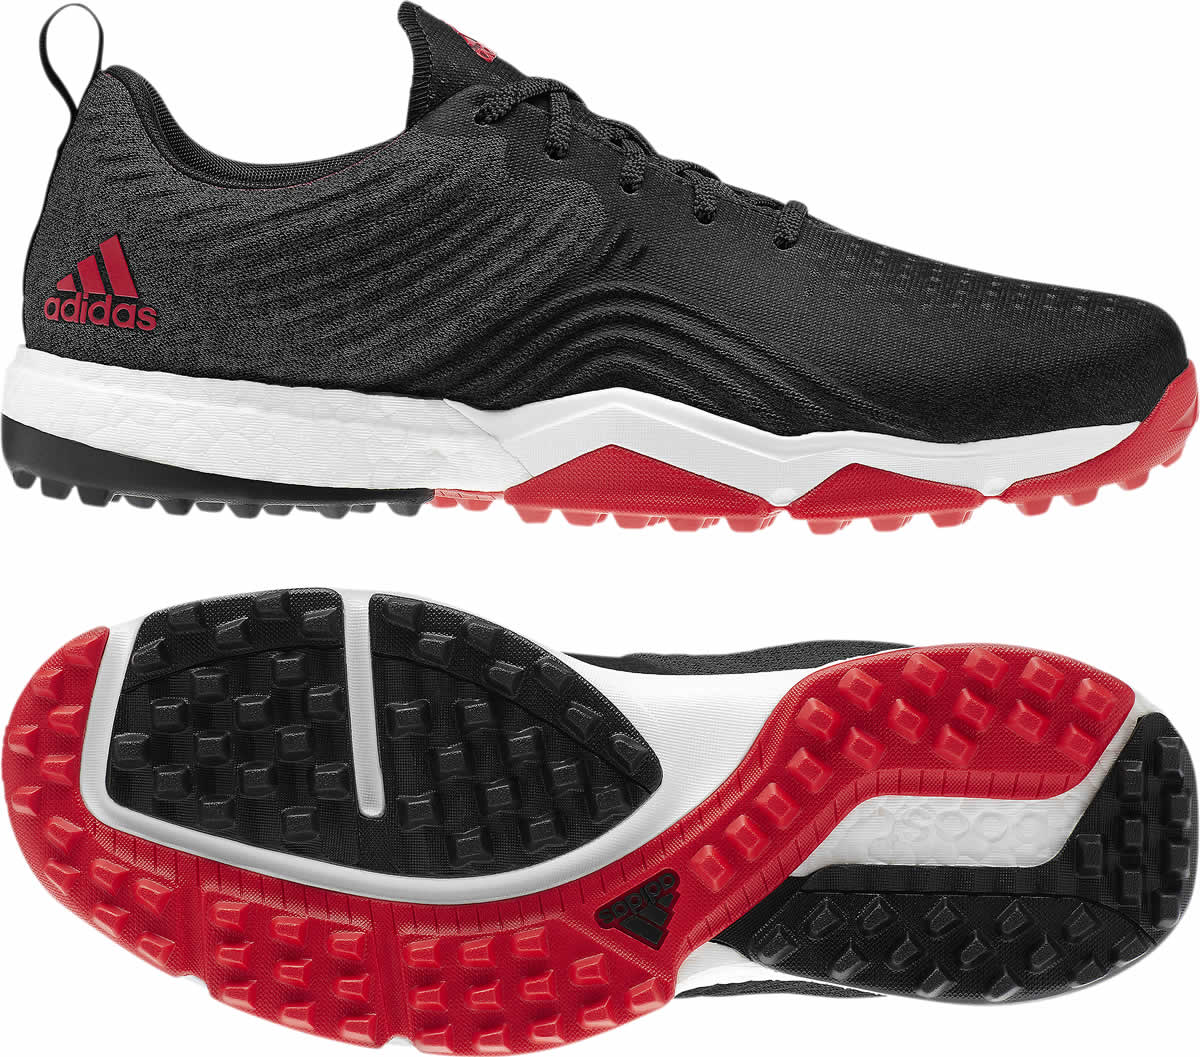 adidas 4orged spikeless golf shoes